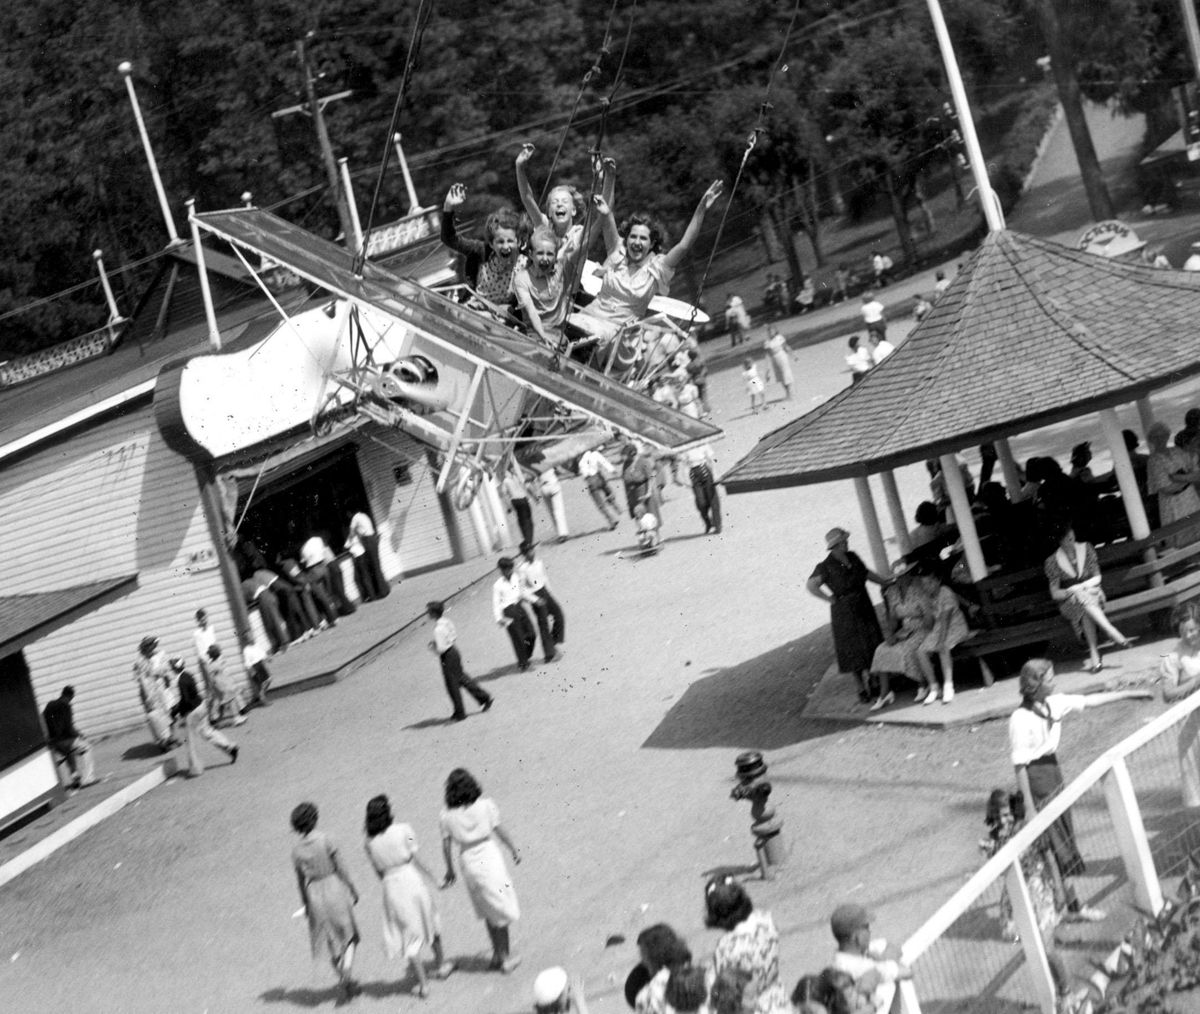 In 1941 the amusement rides at Natatorium Park were in full swing.  The park, which opened in 1893, was originally known as Twickenham Park, and was operated by Spokane United Railways until 1929 when it was sold to Louis Vogel.   The park closed in 1968. (PHOTO ARCHIVE / SR)